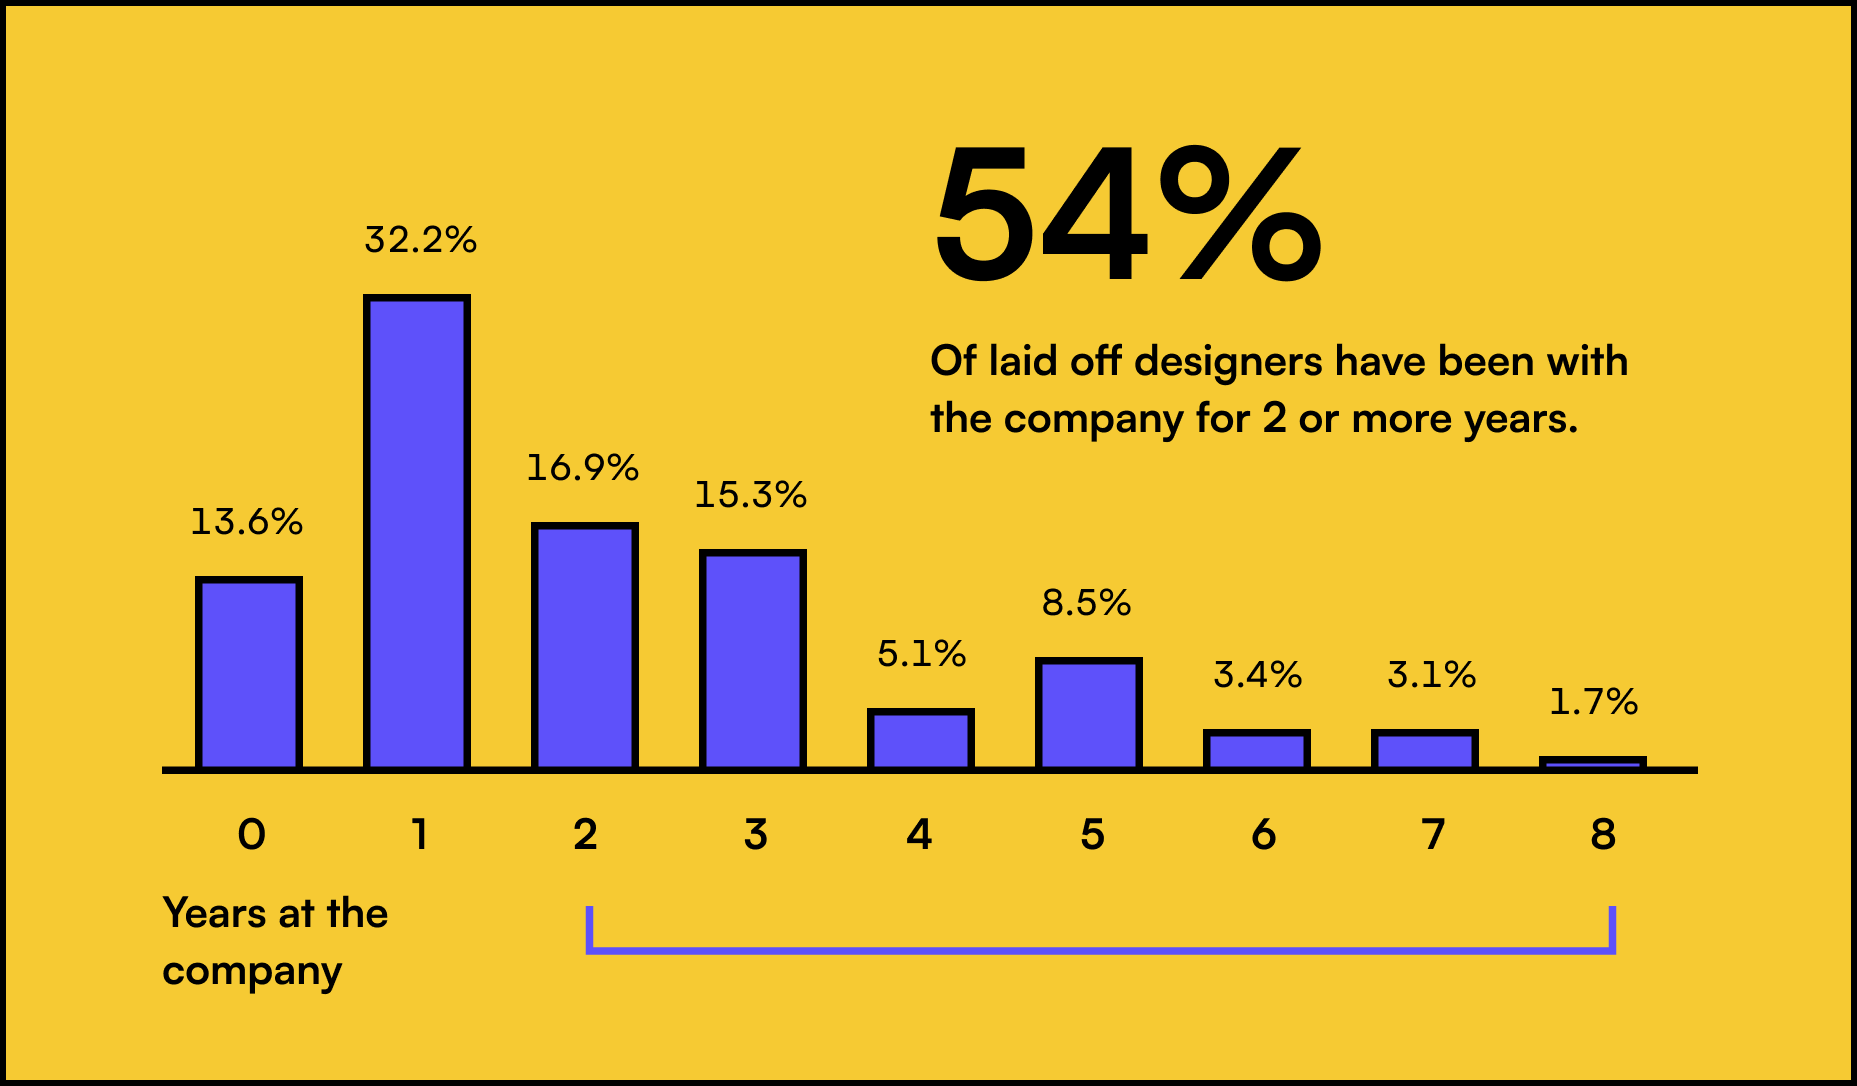 54% of designers have been with the company for 2 or more years.